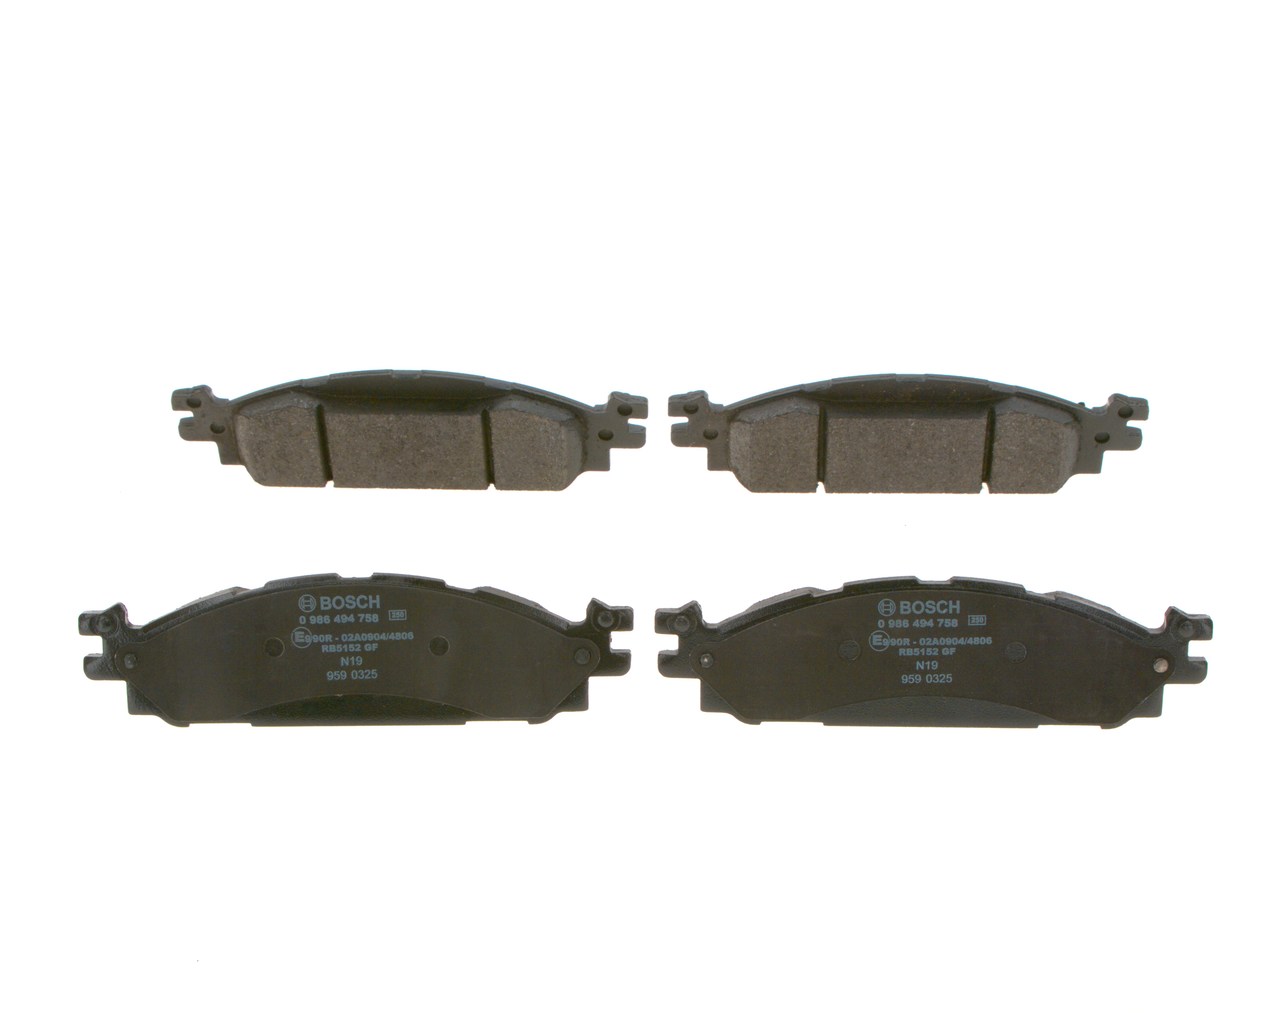 BP1932 BOSCH Low-Metallic, with anti-squeak plate Height: 54,2mm, Width: 195,6mm, Thickness: 18,5mm Brake pads 0 986 494 758 buy